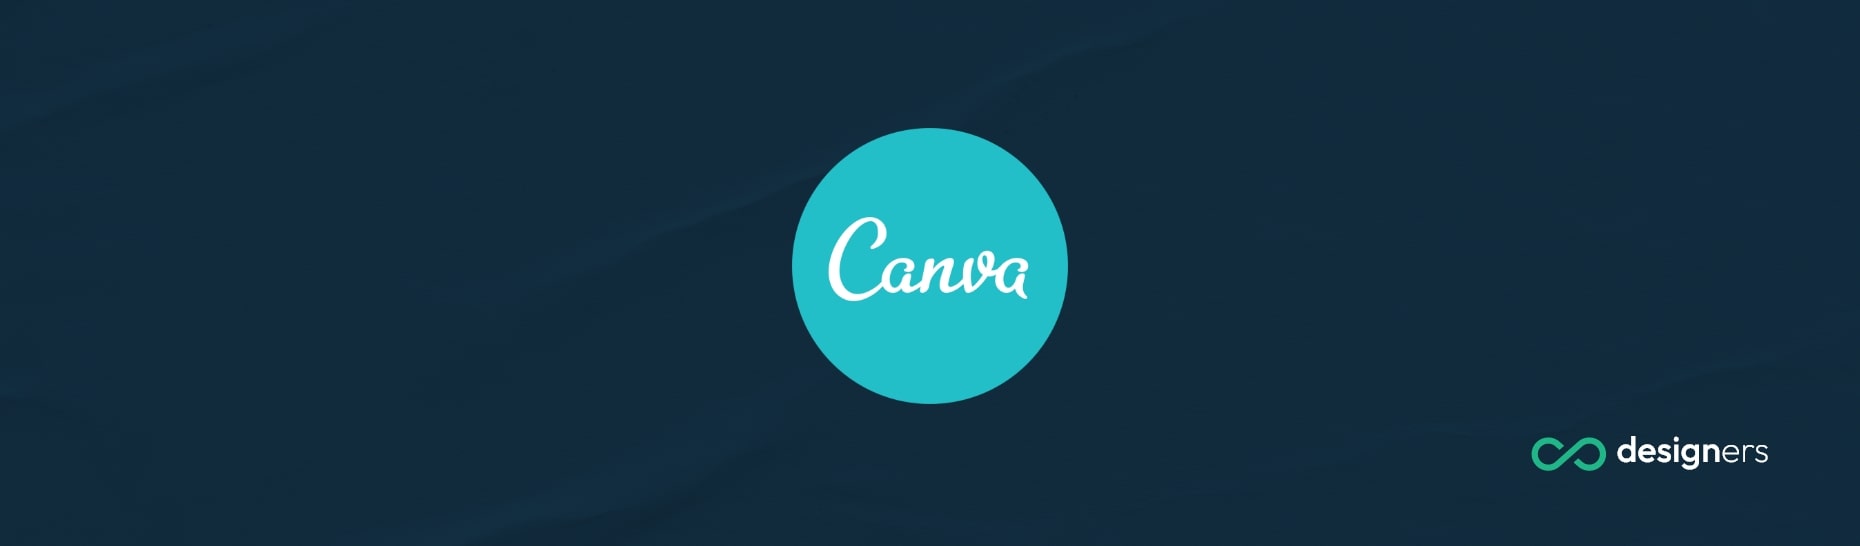 What Size Is an Instagram Post on Canva?